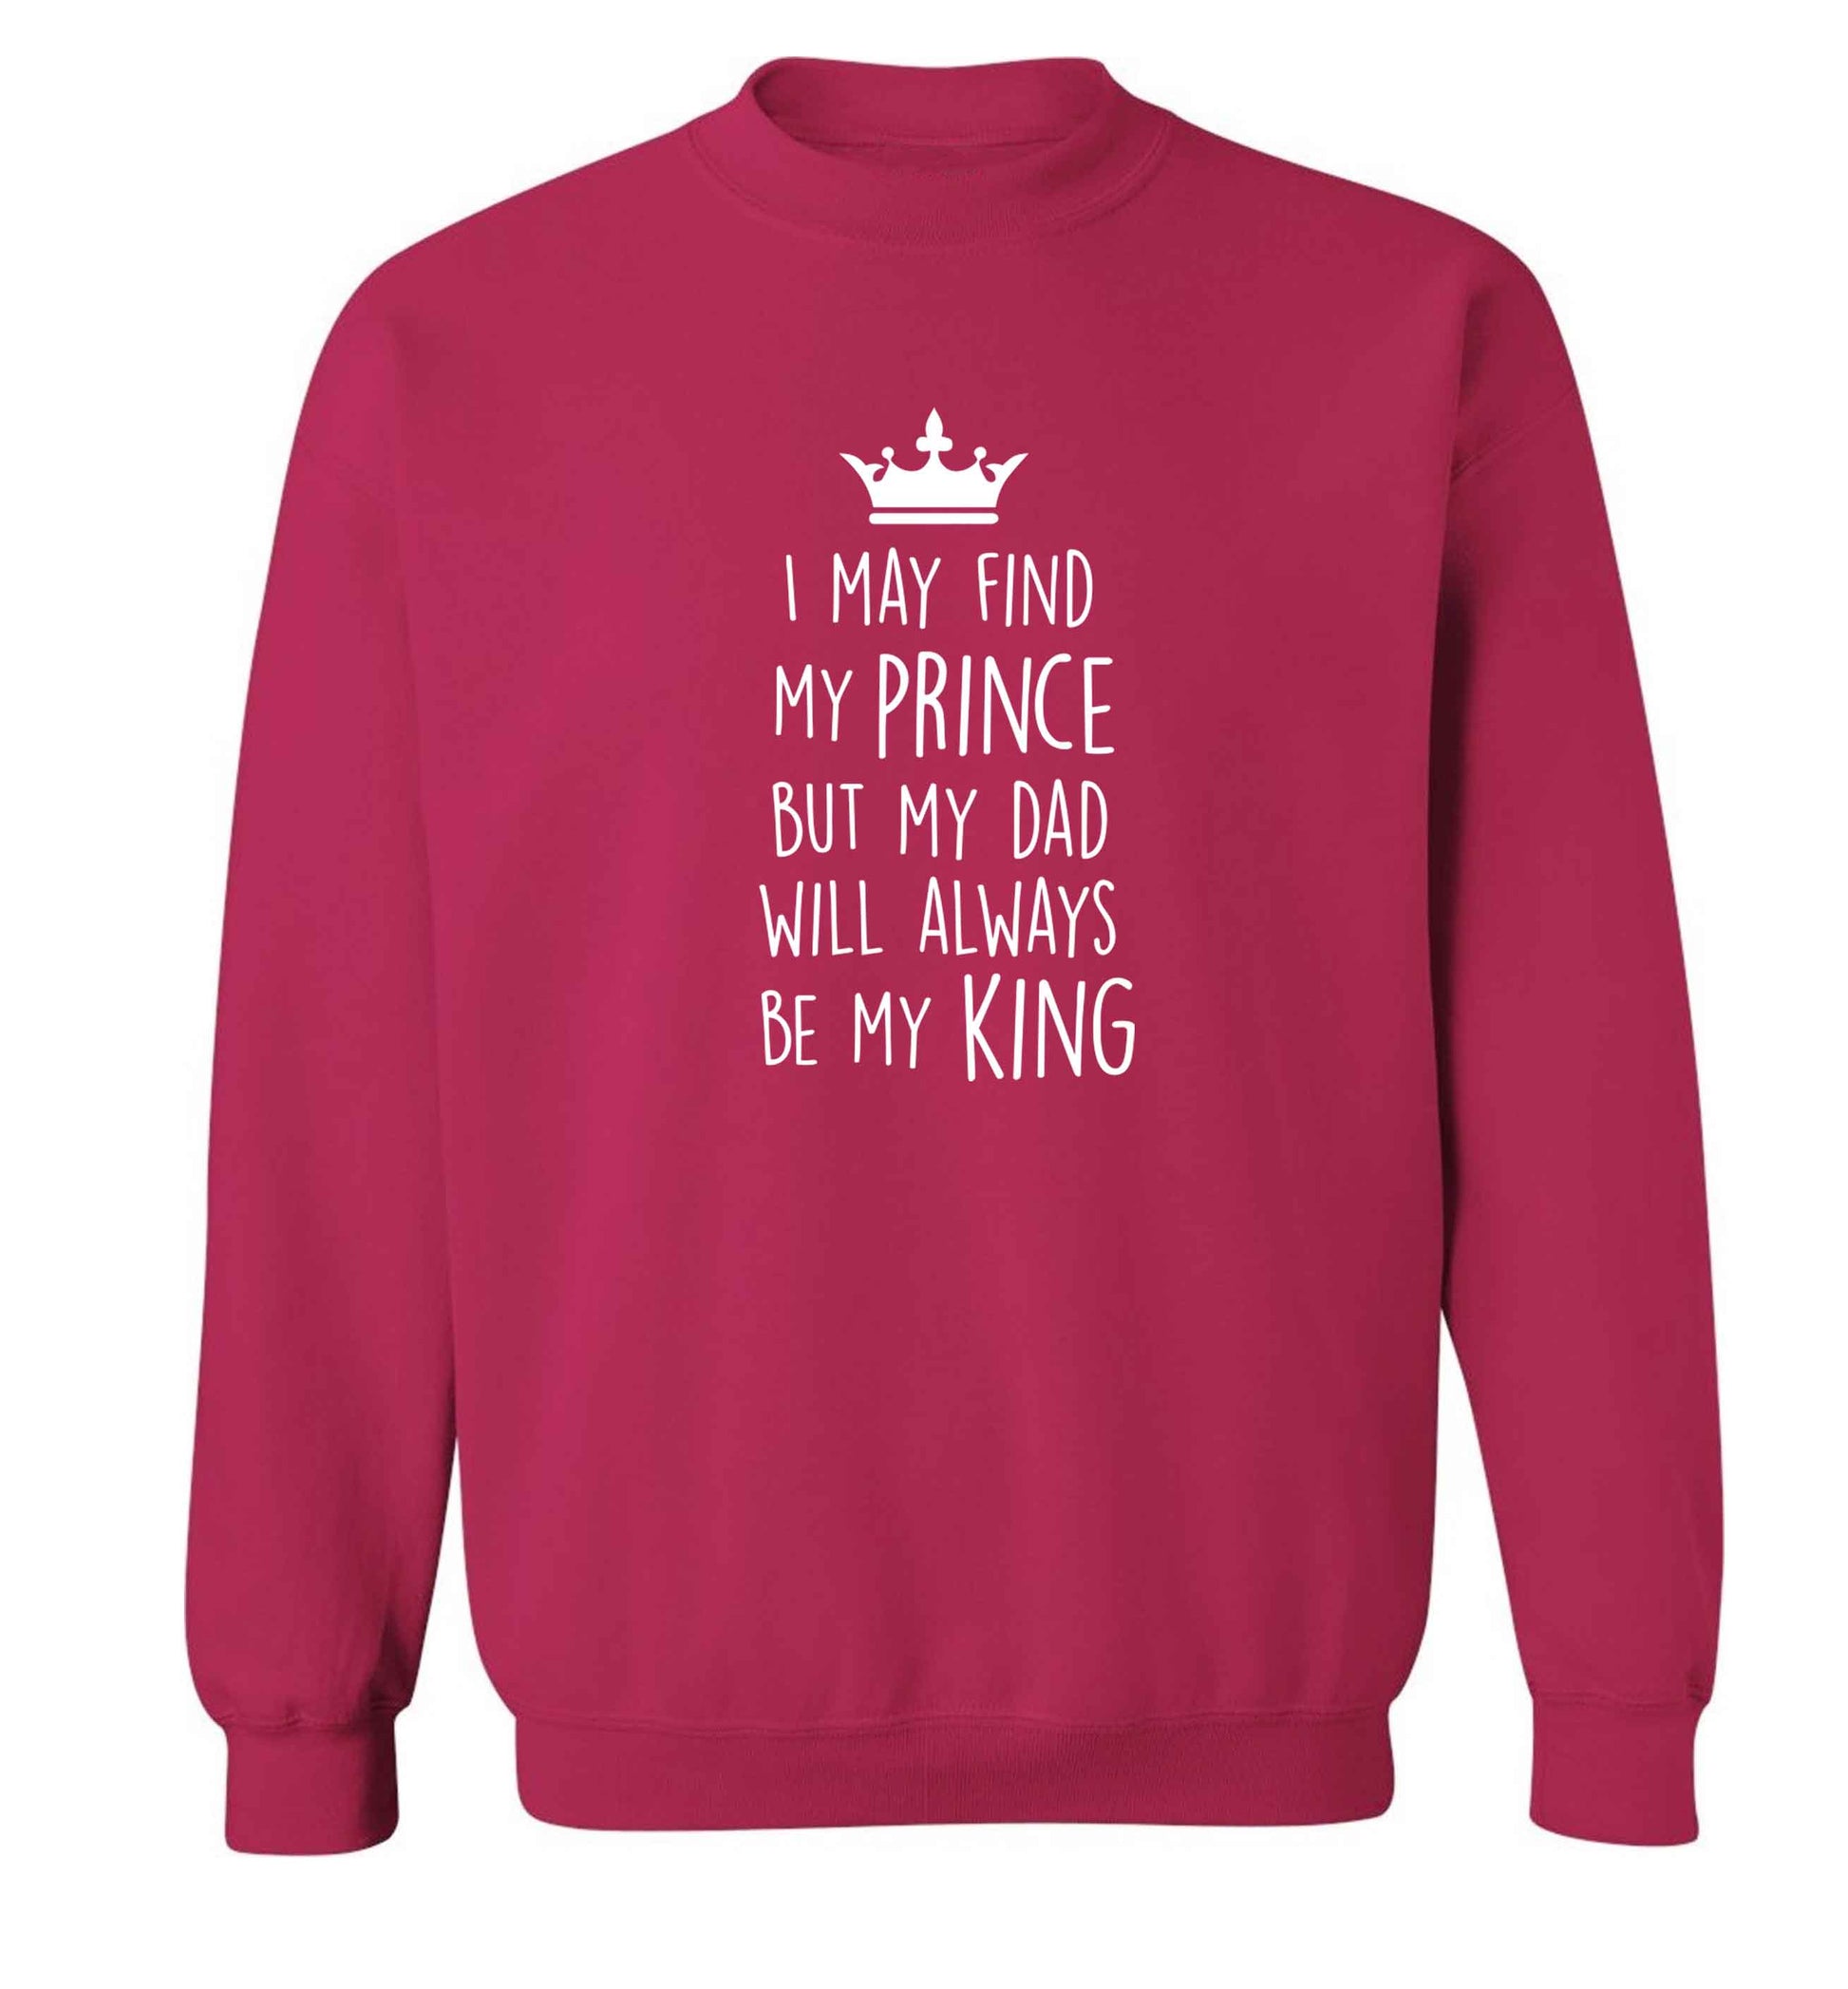 I may find my prince but my dad will always be my king adult's unisex pink sweater 2XL